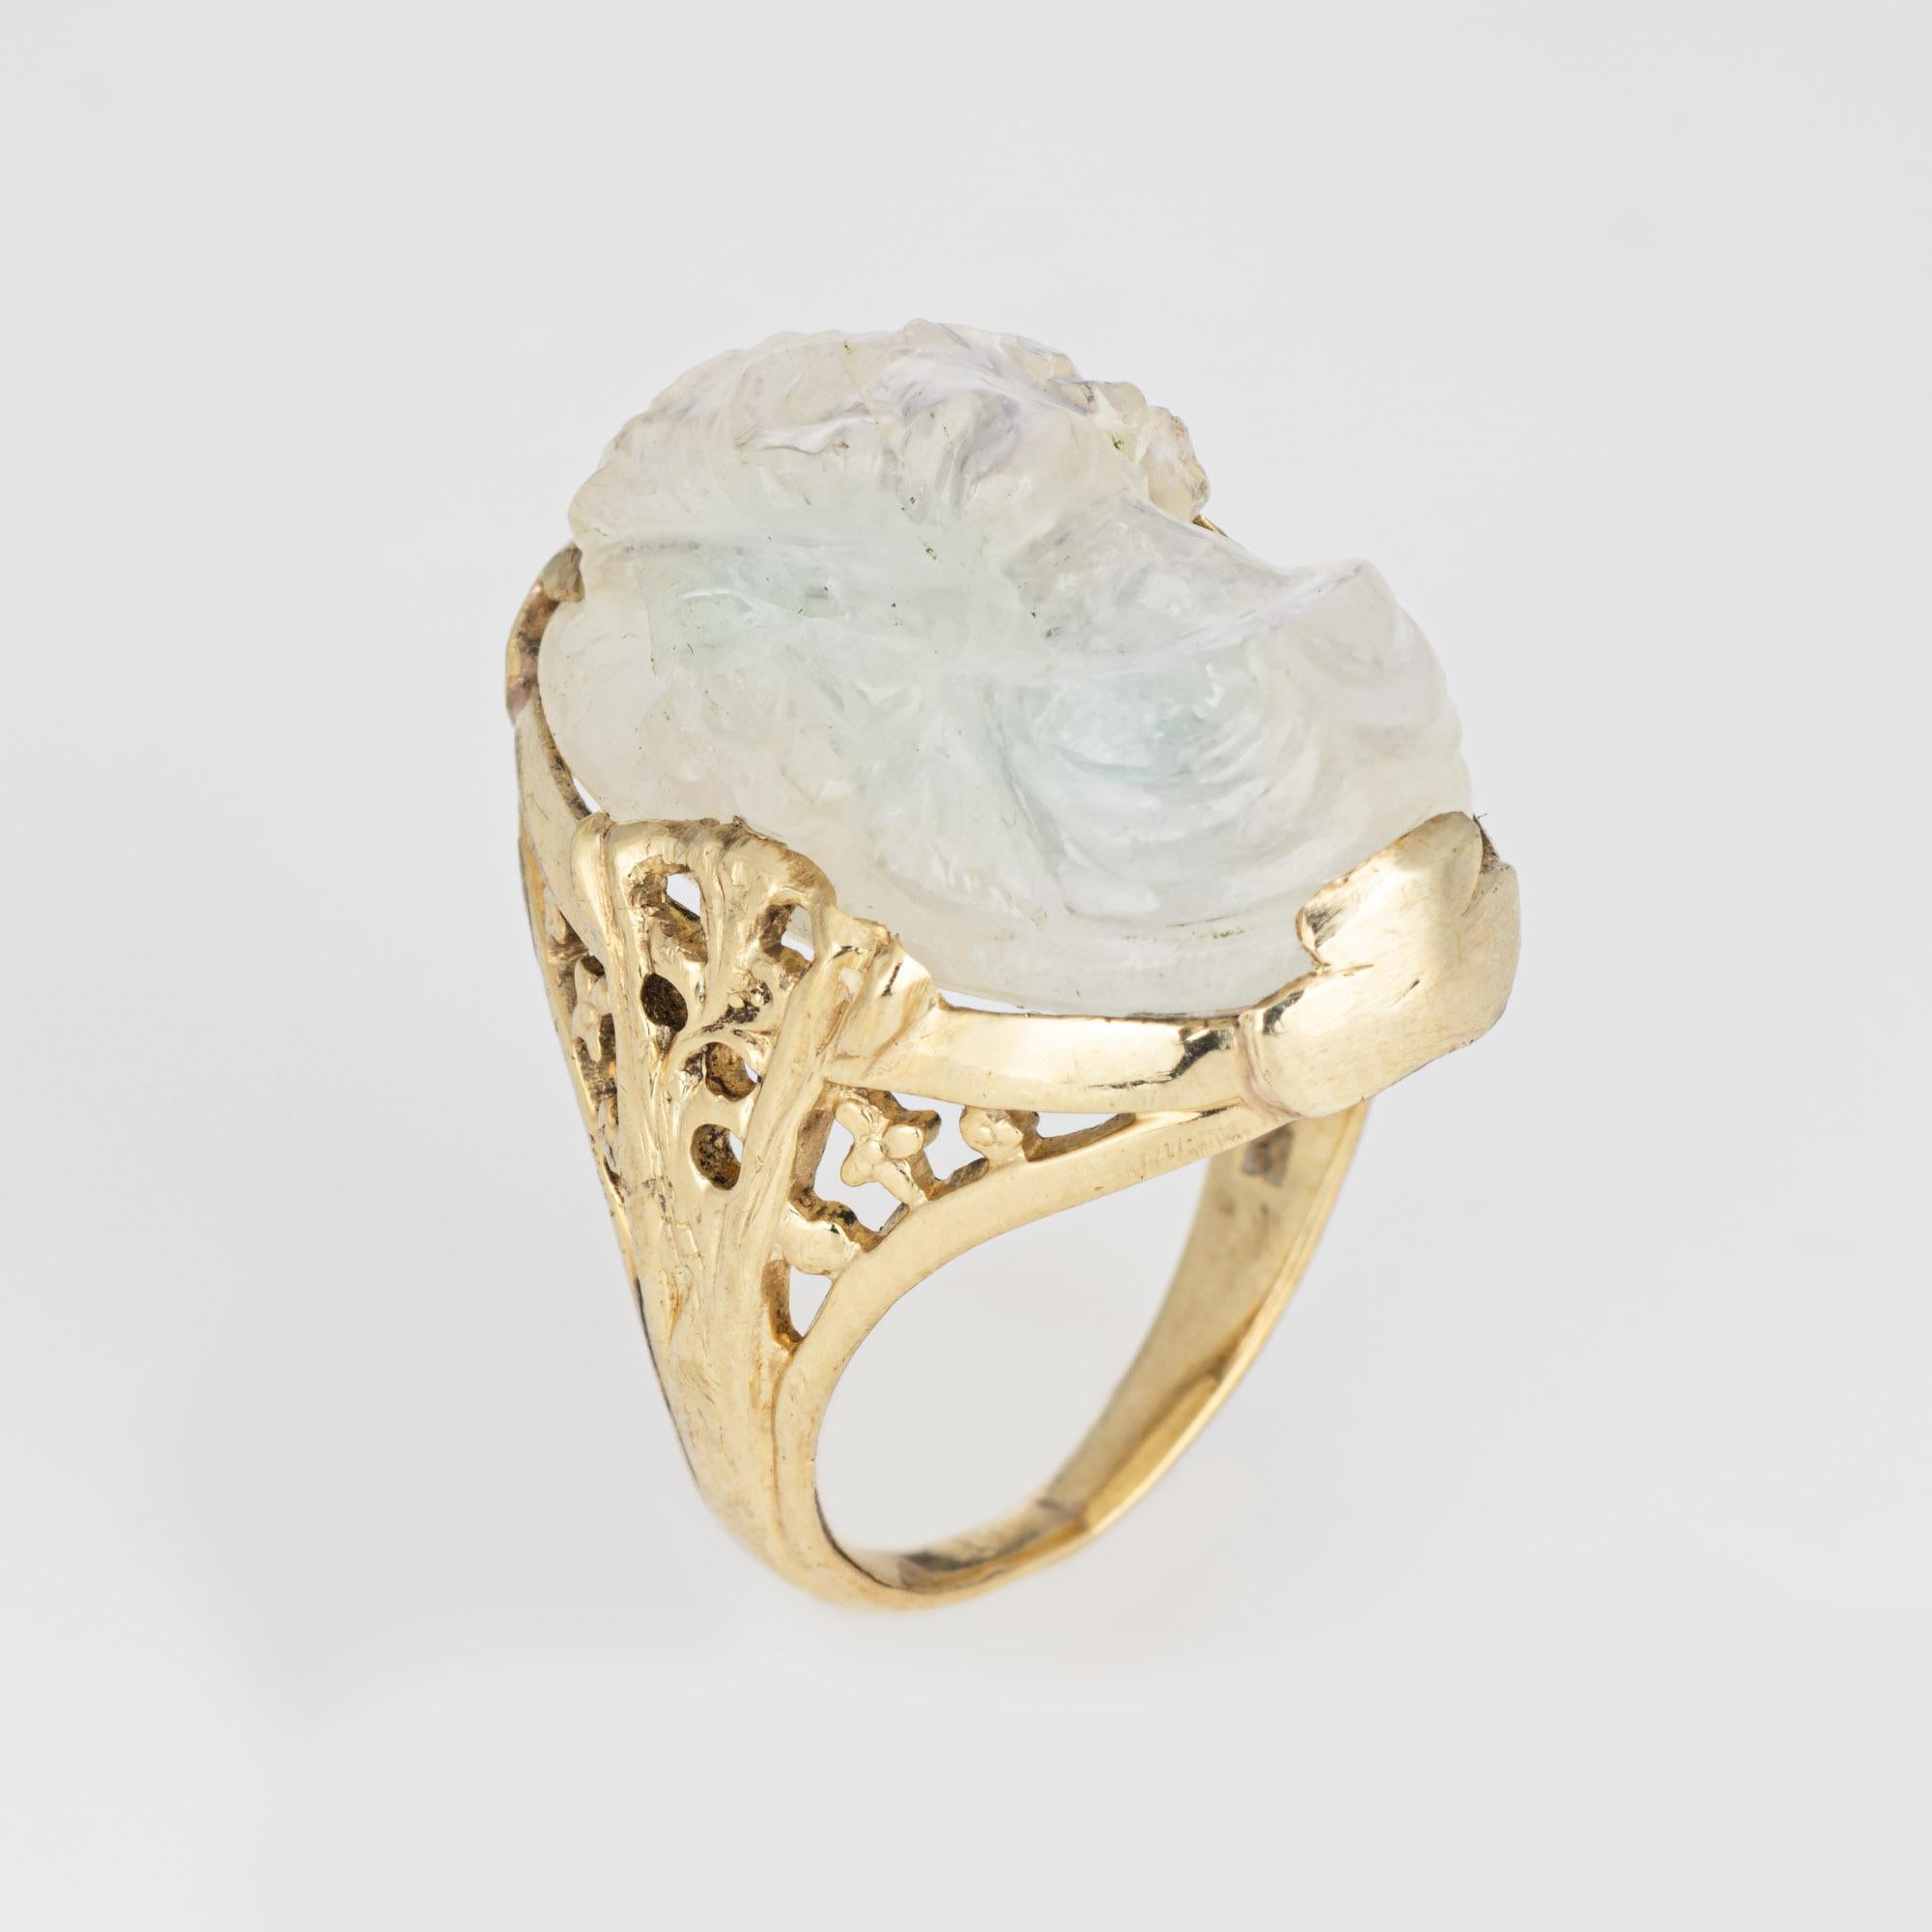 Finely detailed vintage Art Deco carved moonstone ring (circa 1920s to 1930s) crafted in 14k yellow gold. 

Moonstone measures 21mm x 13mm.   

Luminous carved moonstone depicts the side profile of a woman in high relief. The moonstone glows with